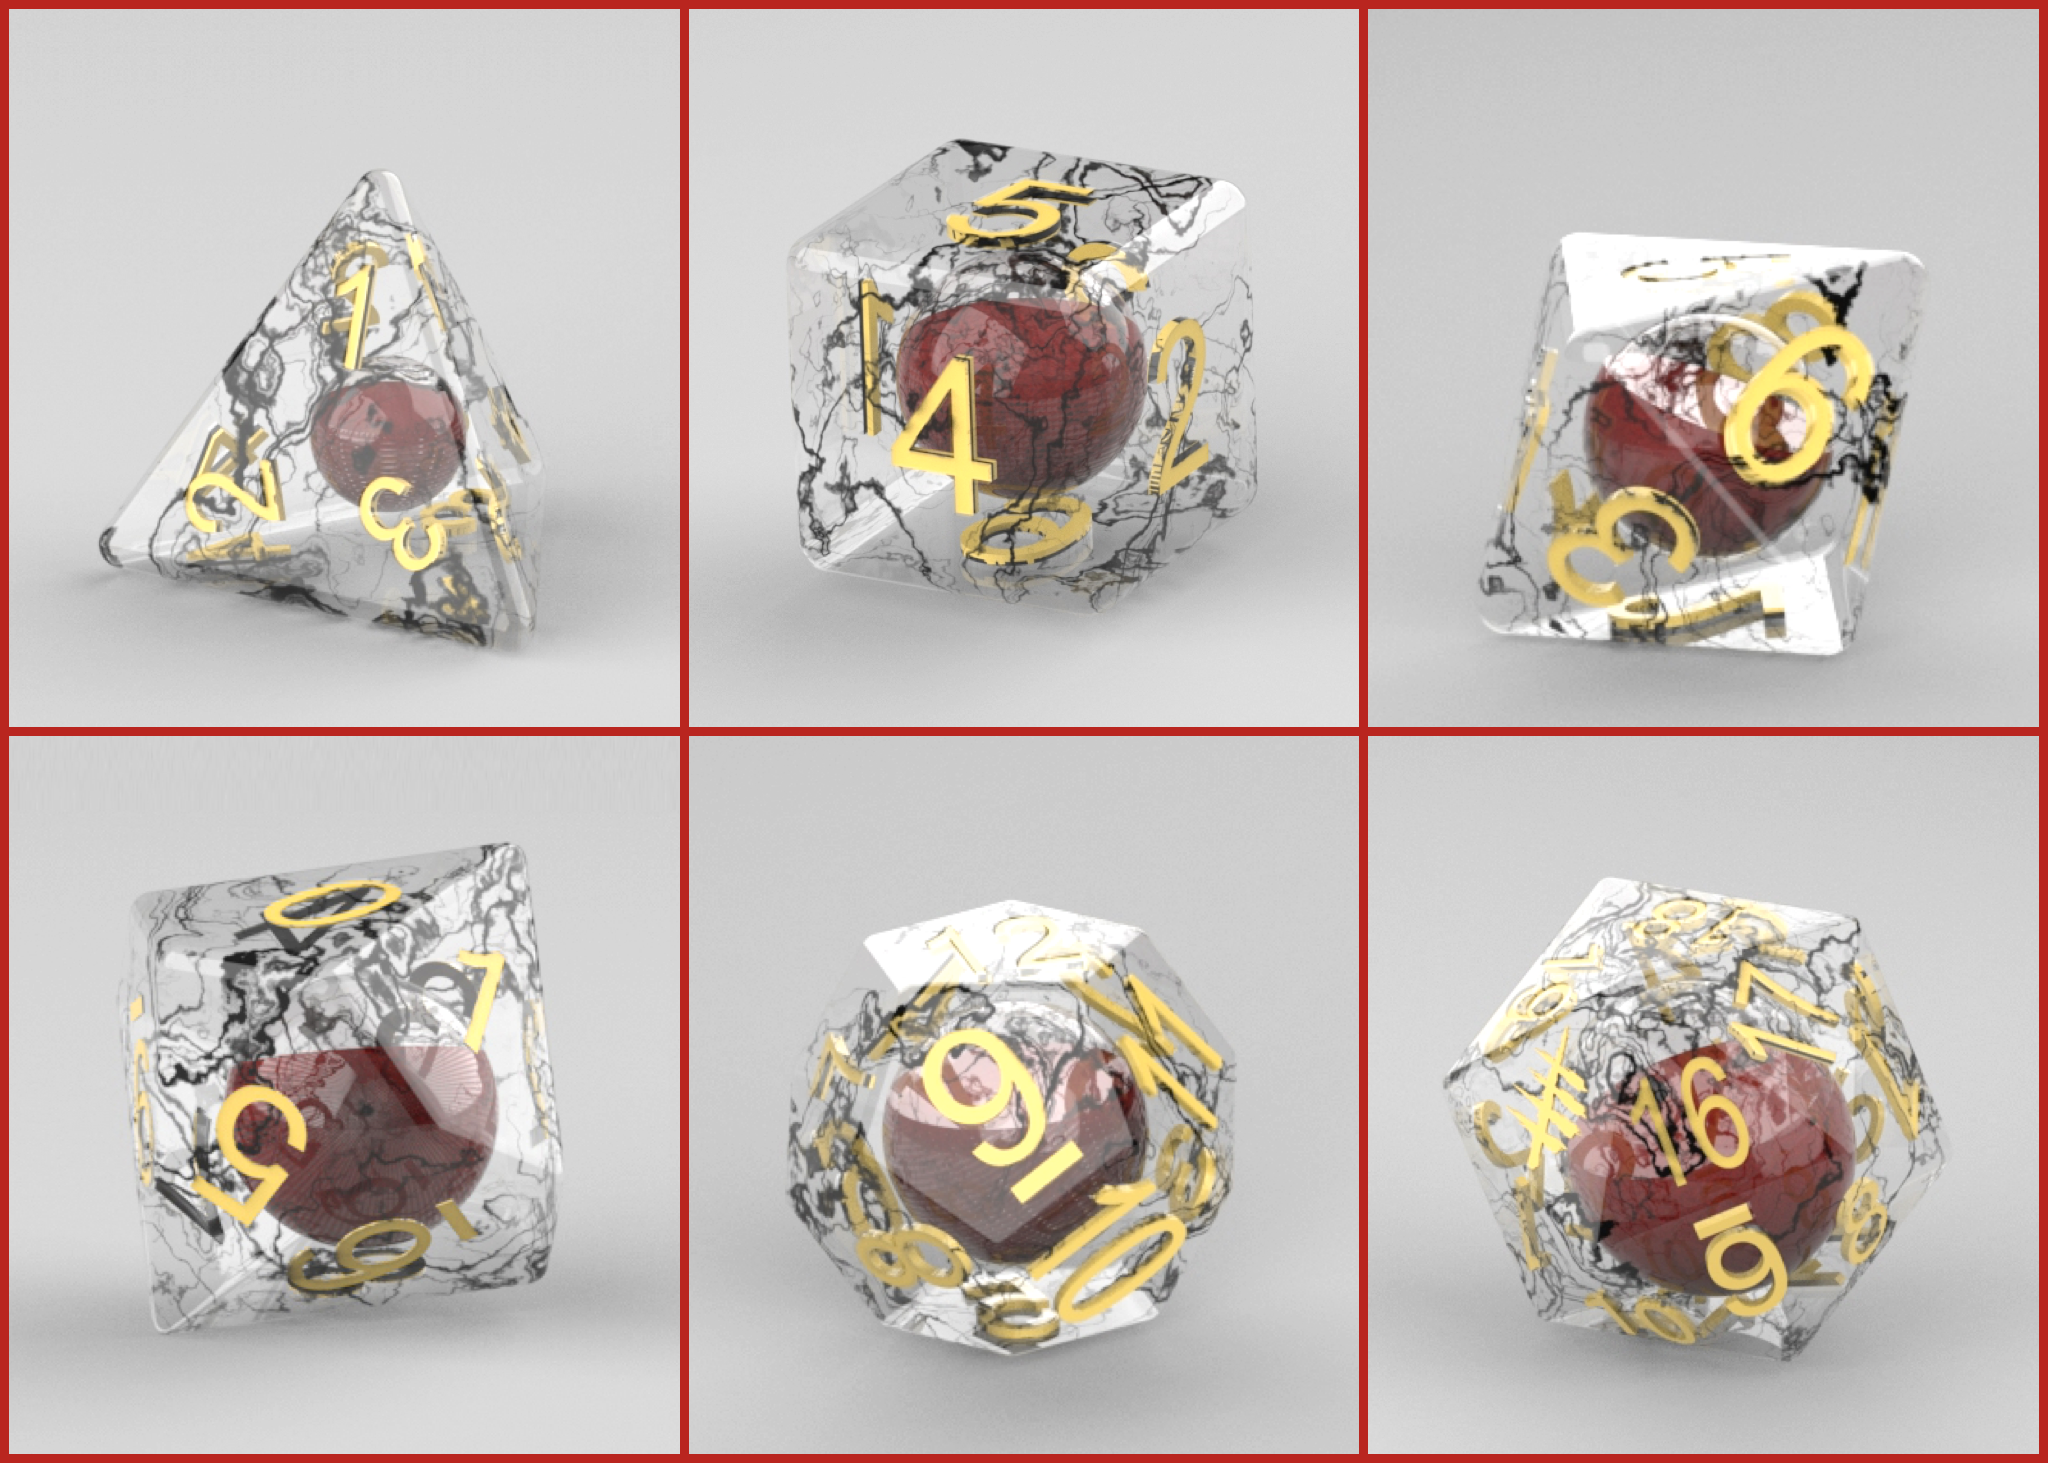 [PRE ORDER] Dead by Daylight - Pools of Blood Dice Set